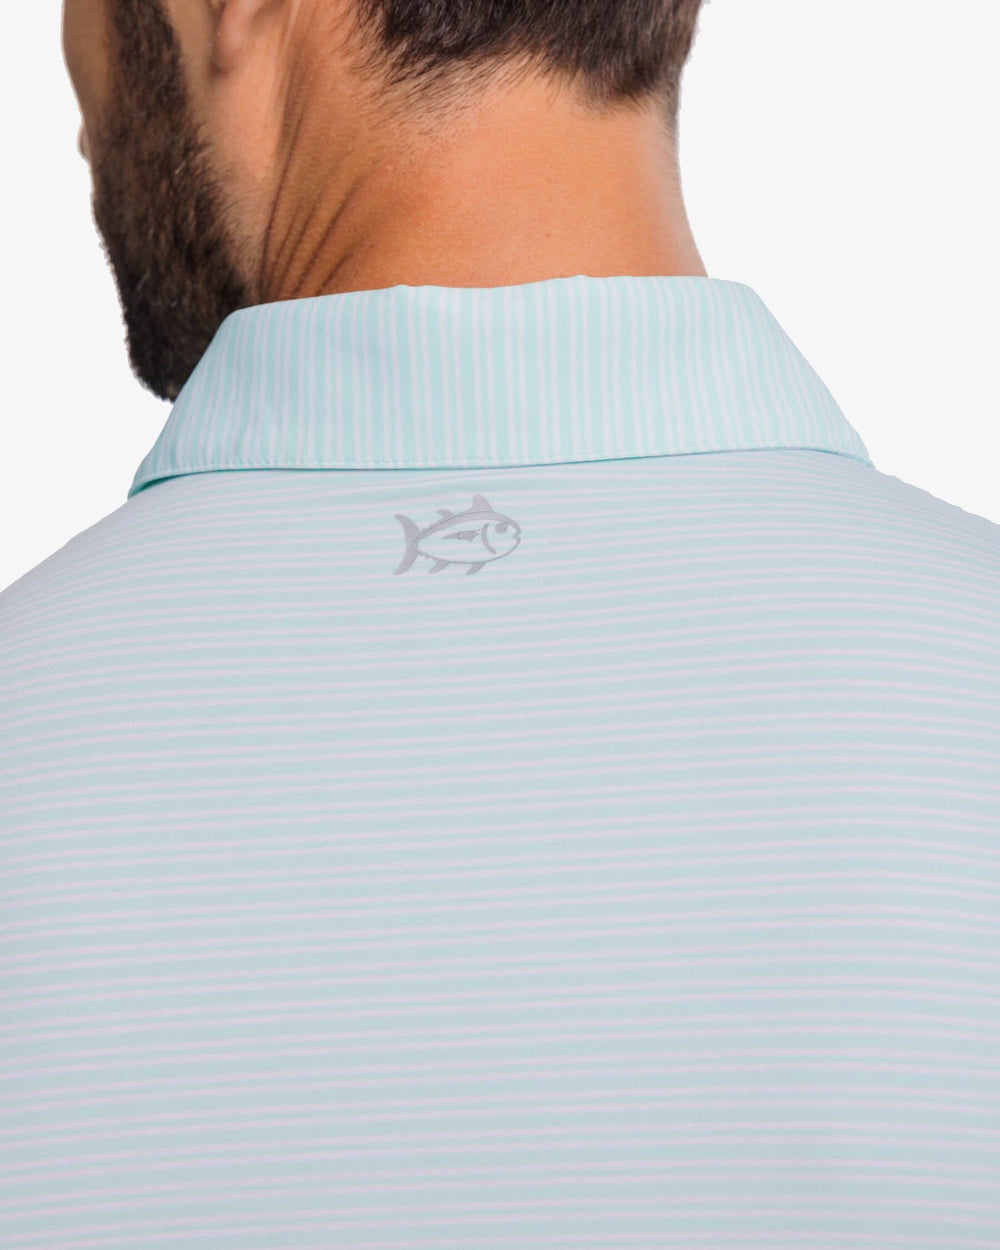 The yoke view of the Southern Tide brrr-eeze Millwood Stripe Performance Polo Shirt by Southern Tide - Baltic Teal